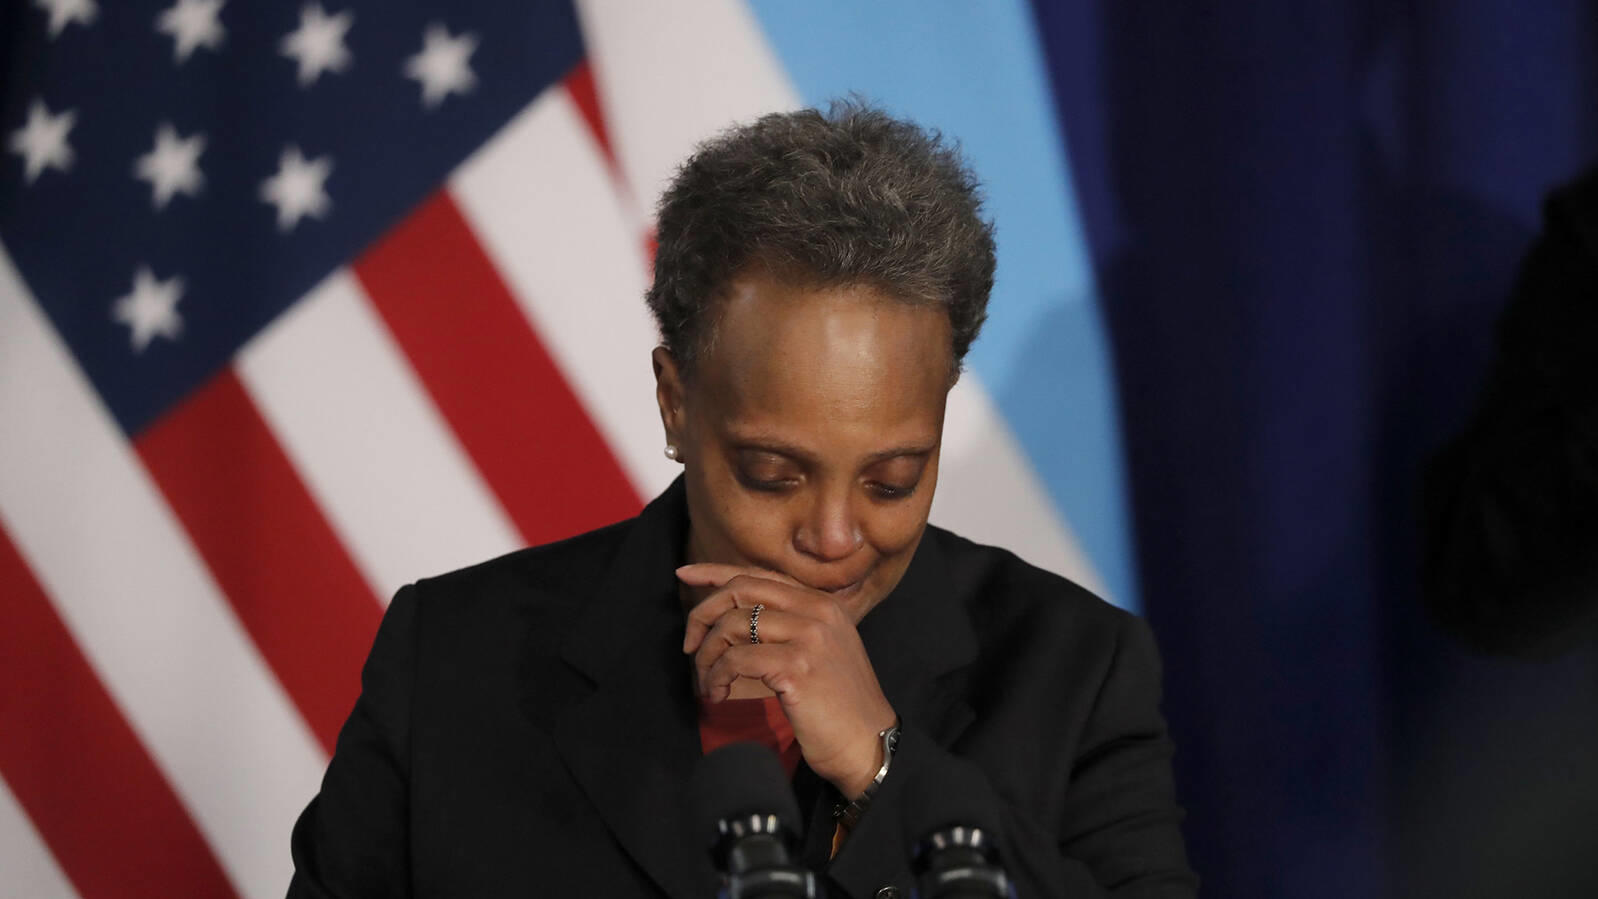  April 15, 2021, Chicago, Illinois, USA: Mayor LORI LIGHTFOOT speaks at City Hall about the video of the fatal police shooting of 13-year-old Adam Toledo last month. The mayor and city leaders appealed for calm Thursday. Chicago USA - ZUMAm67_ 202104